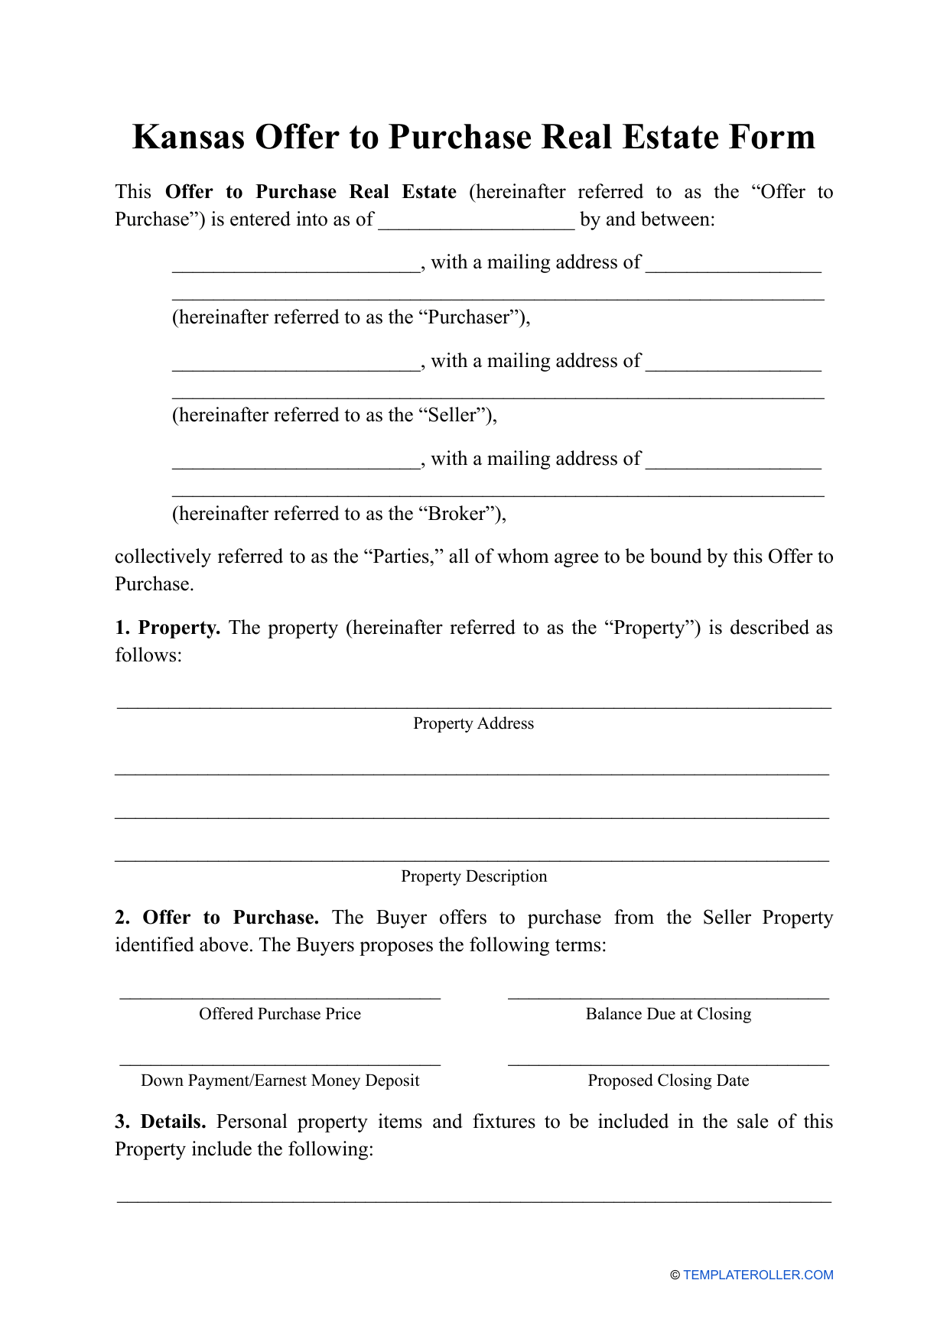 Offer to Purchase Real Estate Form - Kansas, Page 1